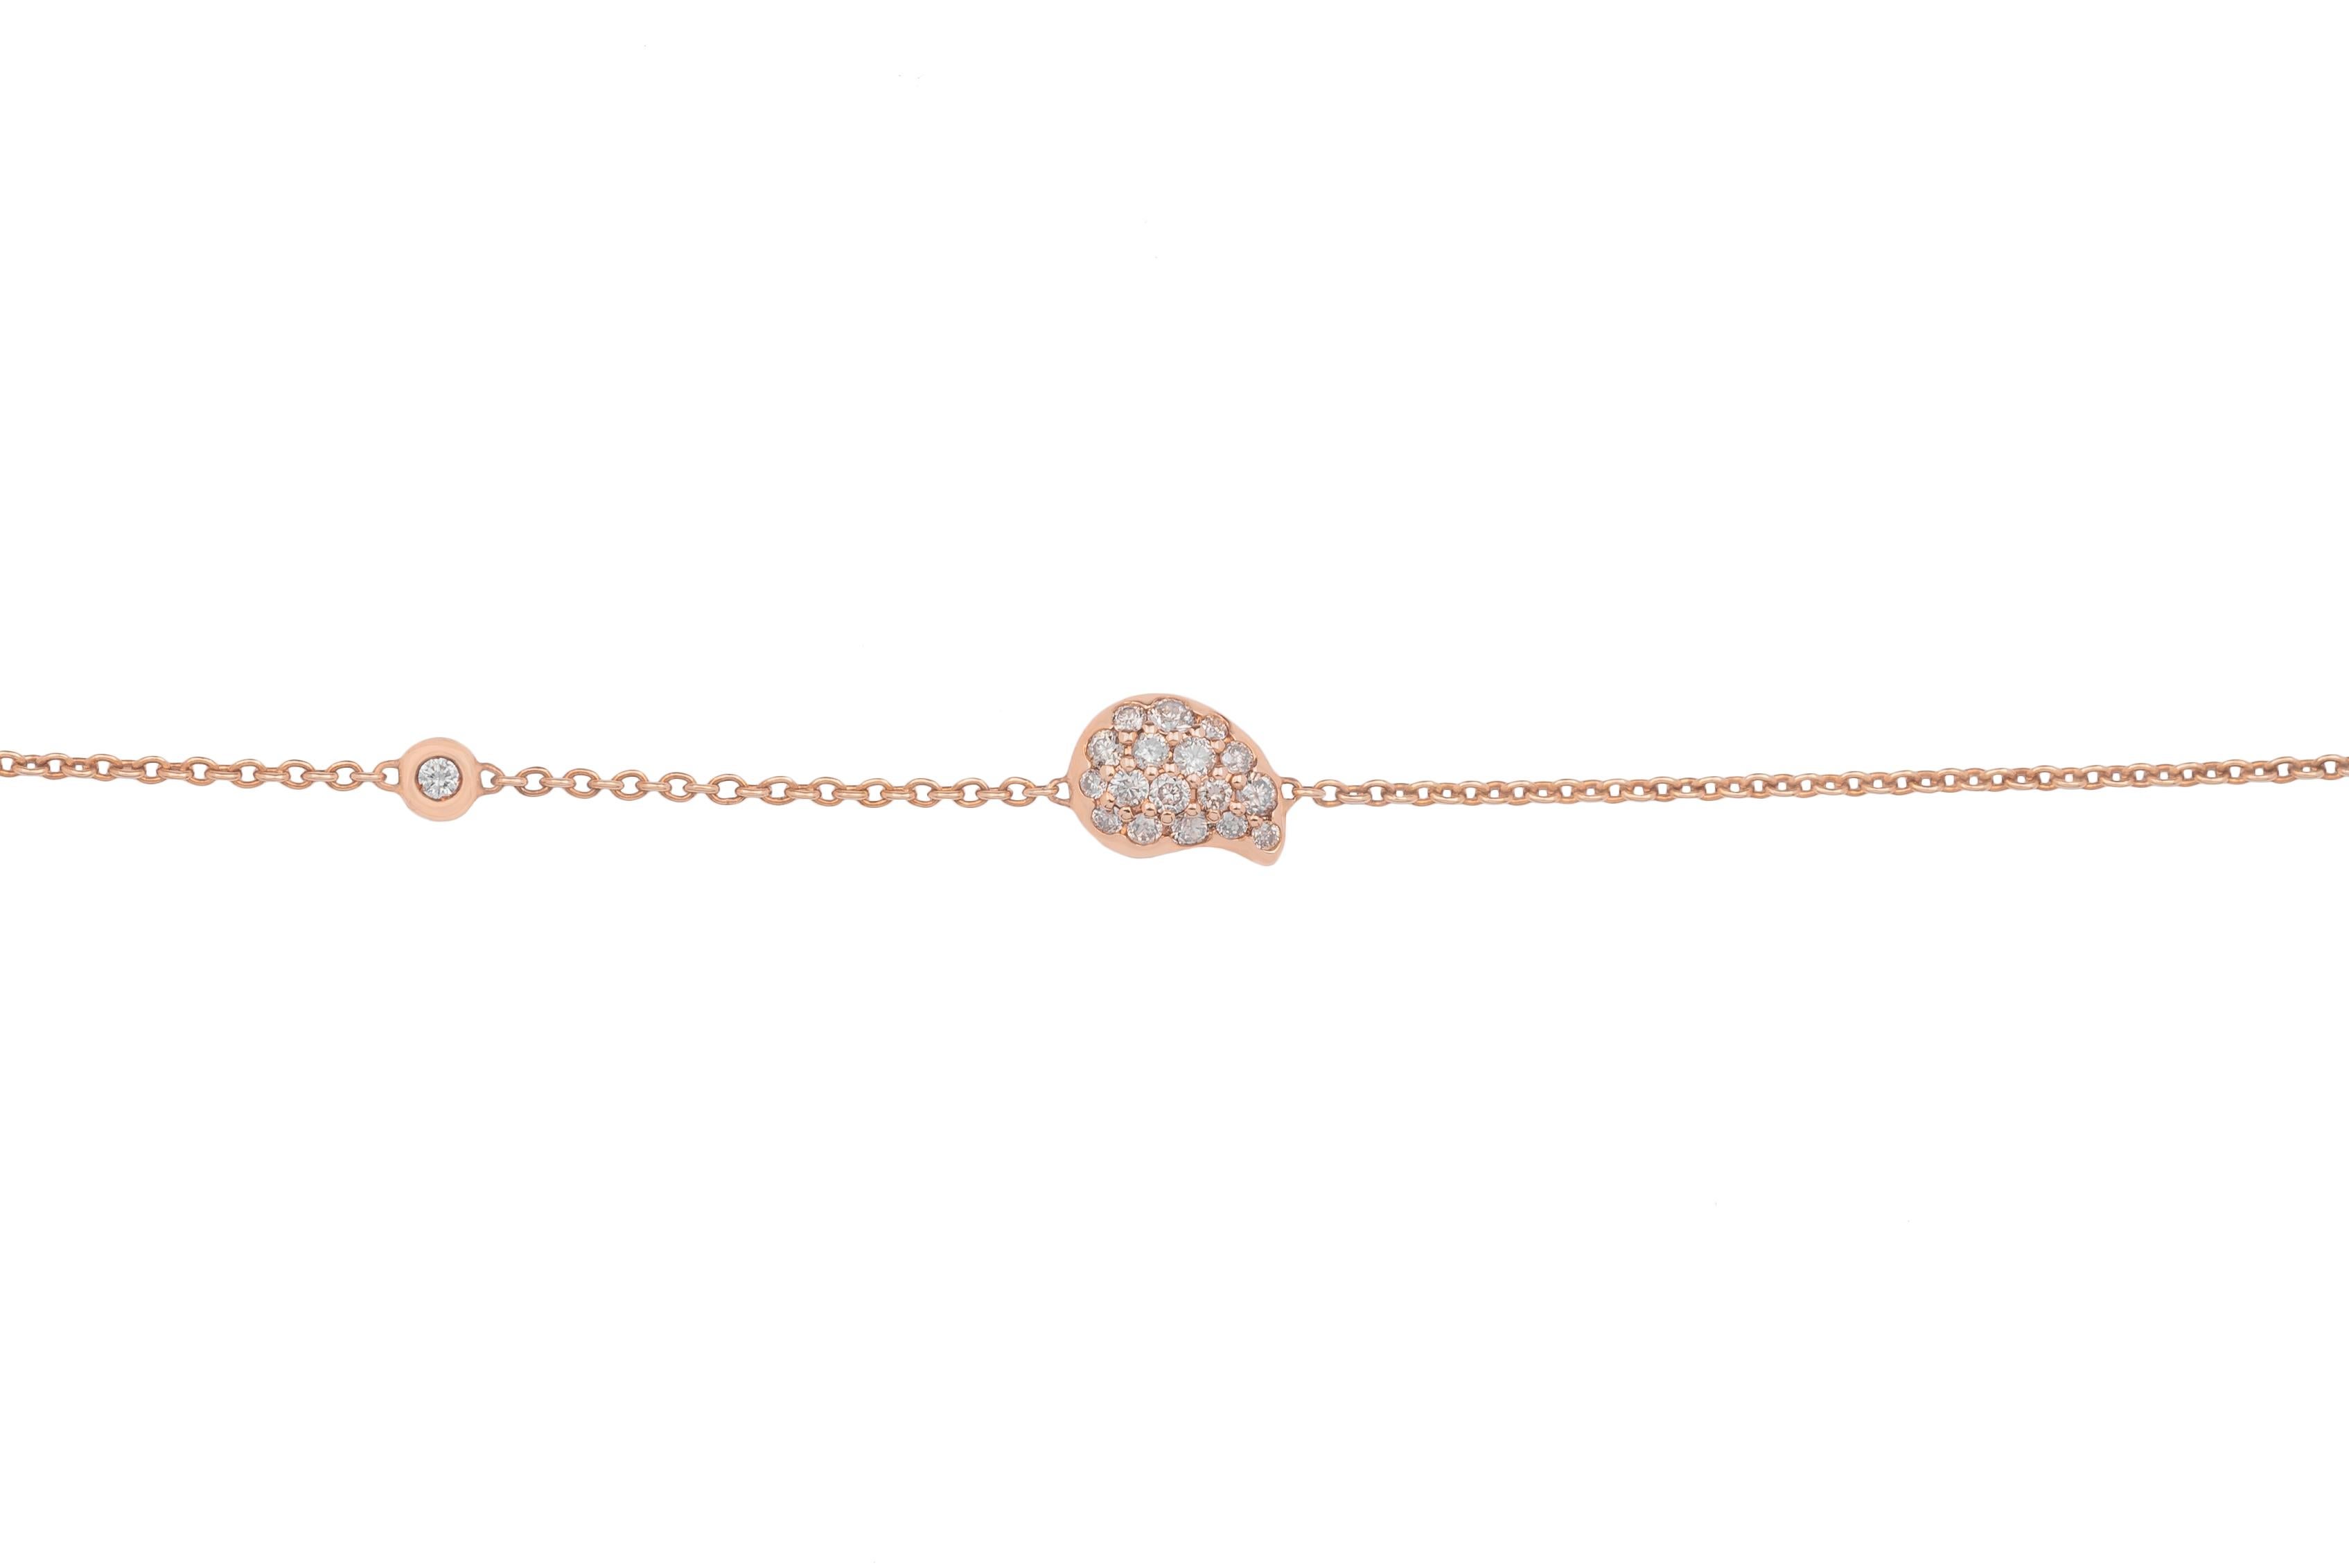 This 18k rose gold bracelet with brown diamonds is made in Italy by Fanuele Gioielli.    
A rose gold drop with brilliant cut brown diamonds is at the centre of the bracelet, followed by a white diamond.
The length of the bracelet can be adjusted